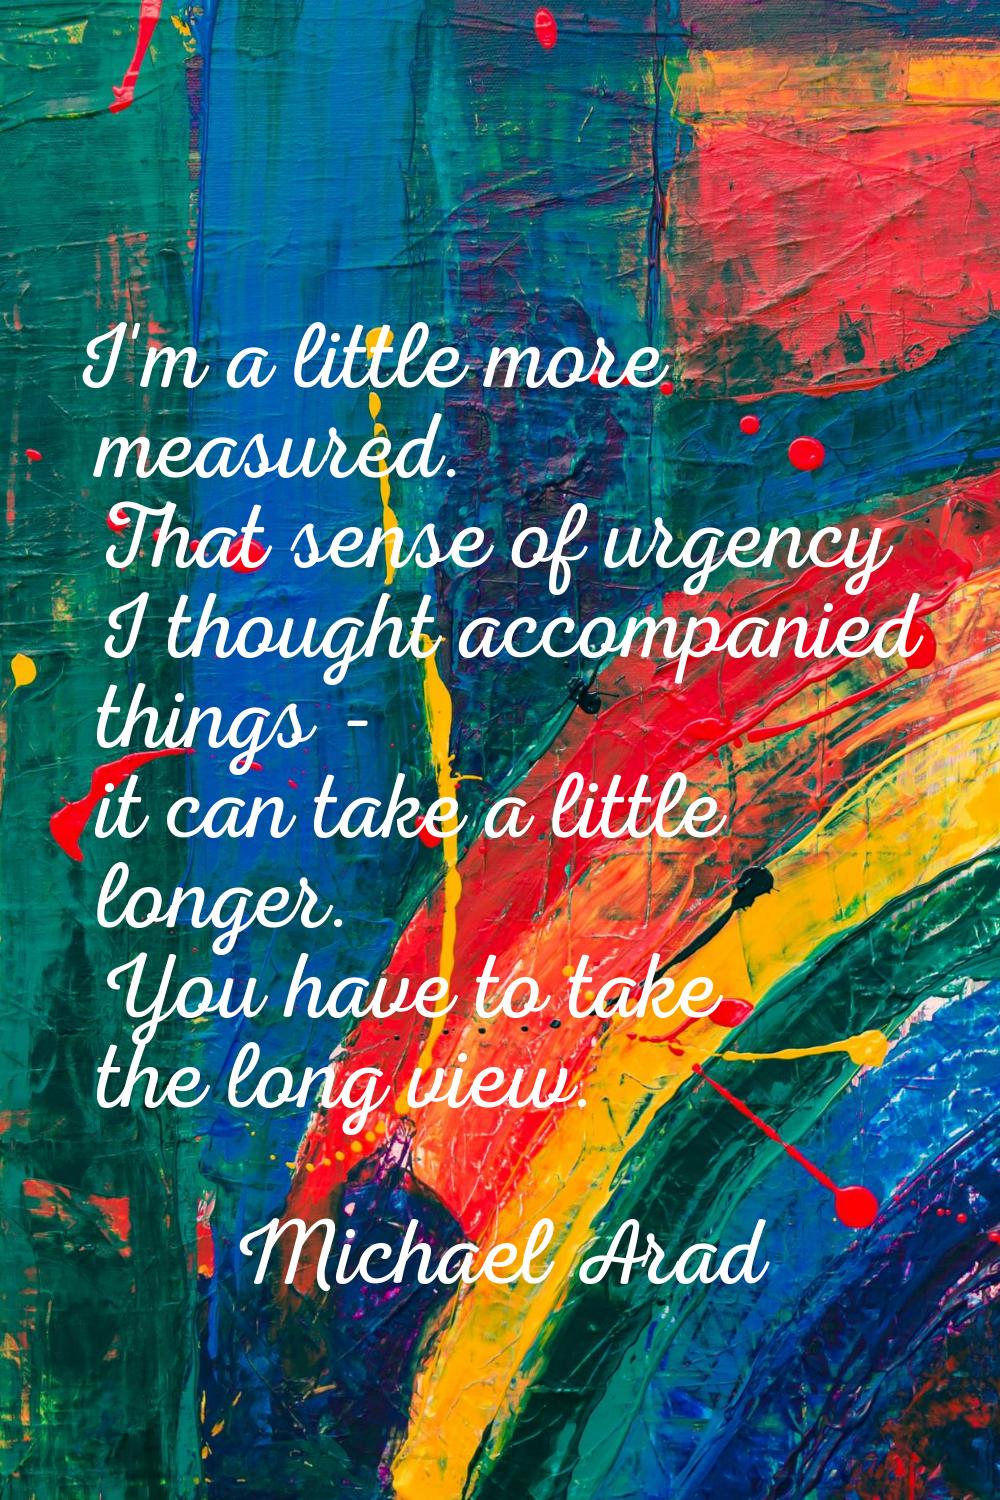 I'm a little more measured. That sense of urgency I thought accompanied things - it can take a litt